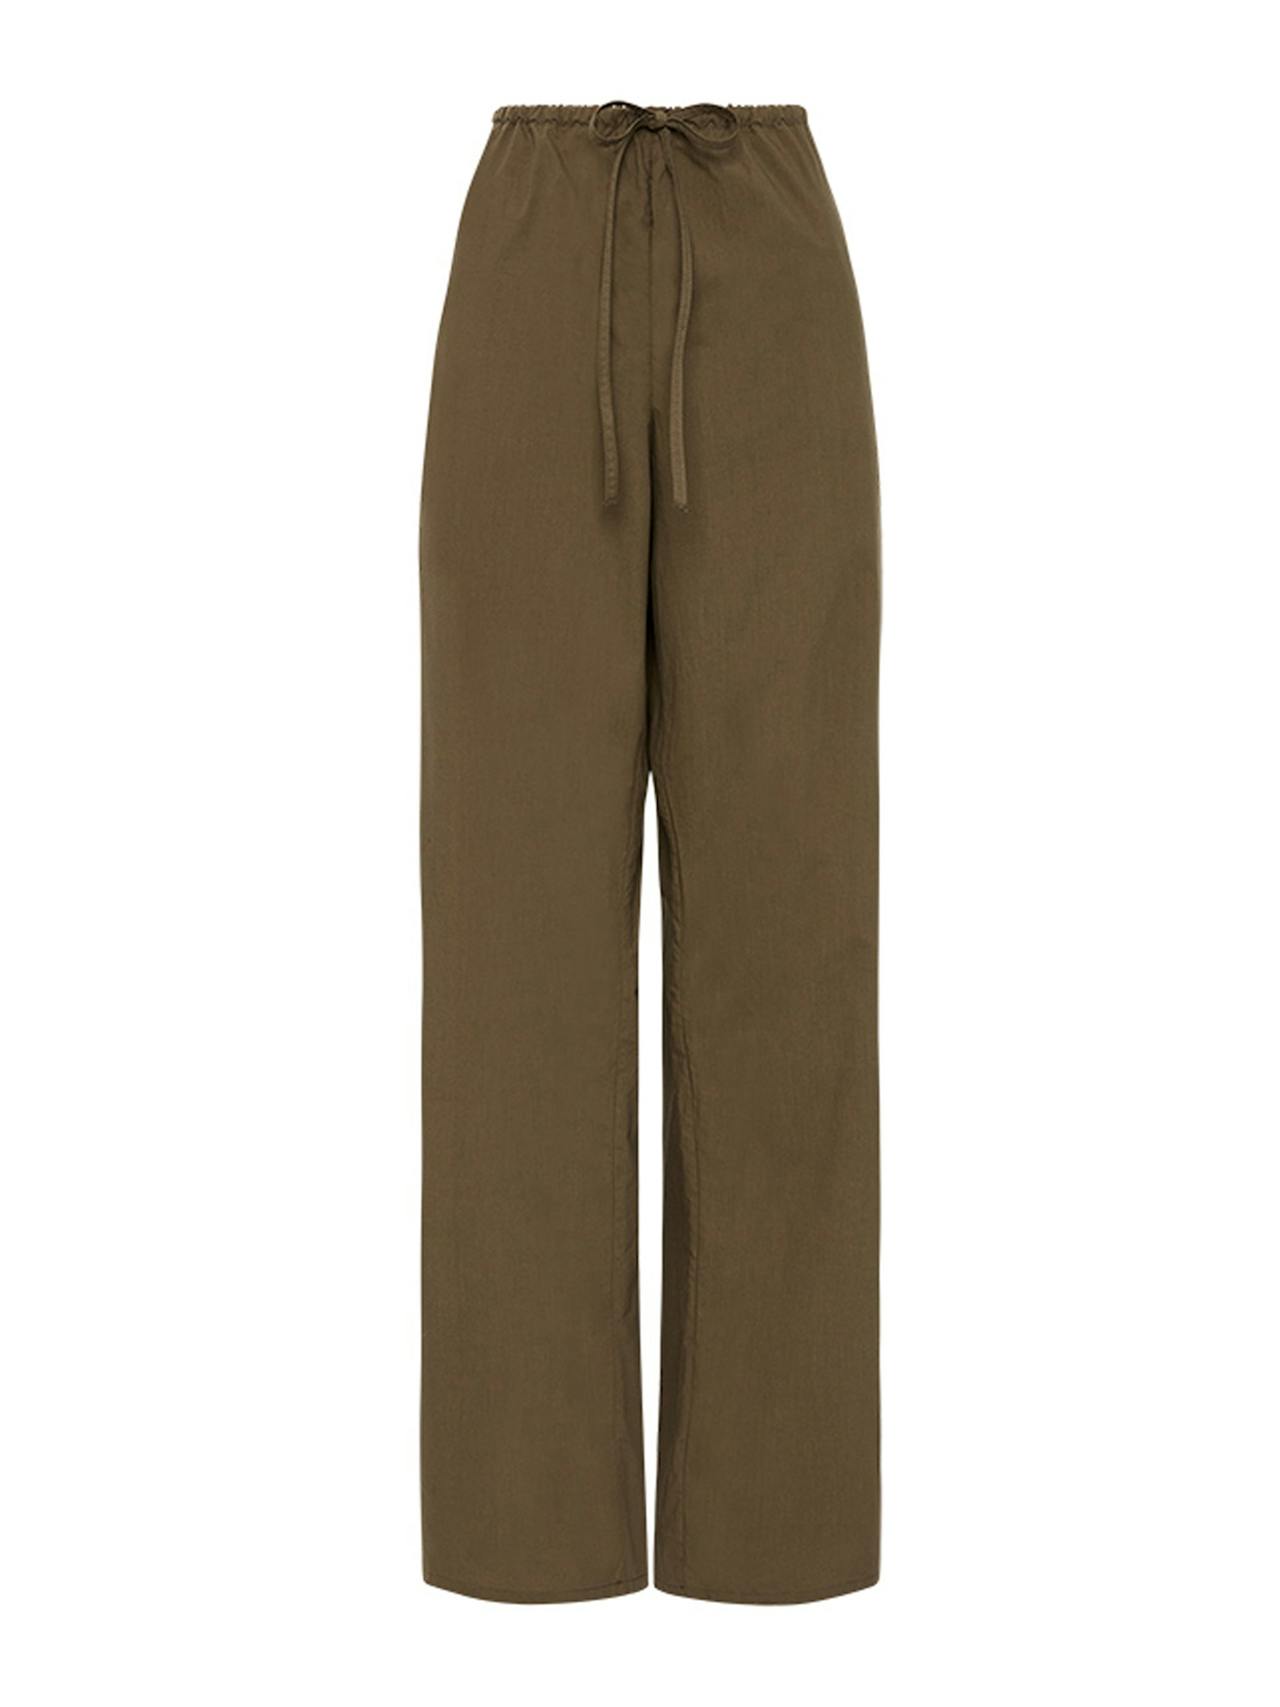 Olive drawcord pants